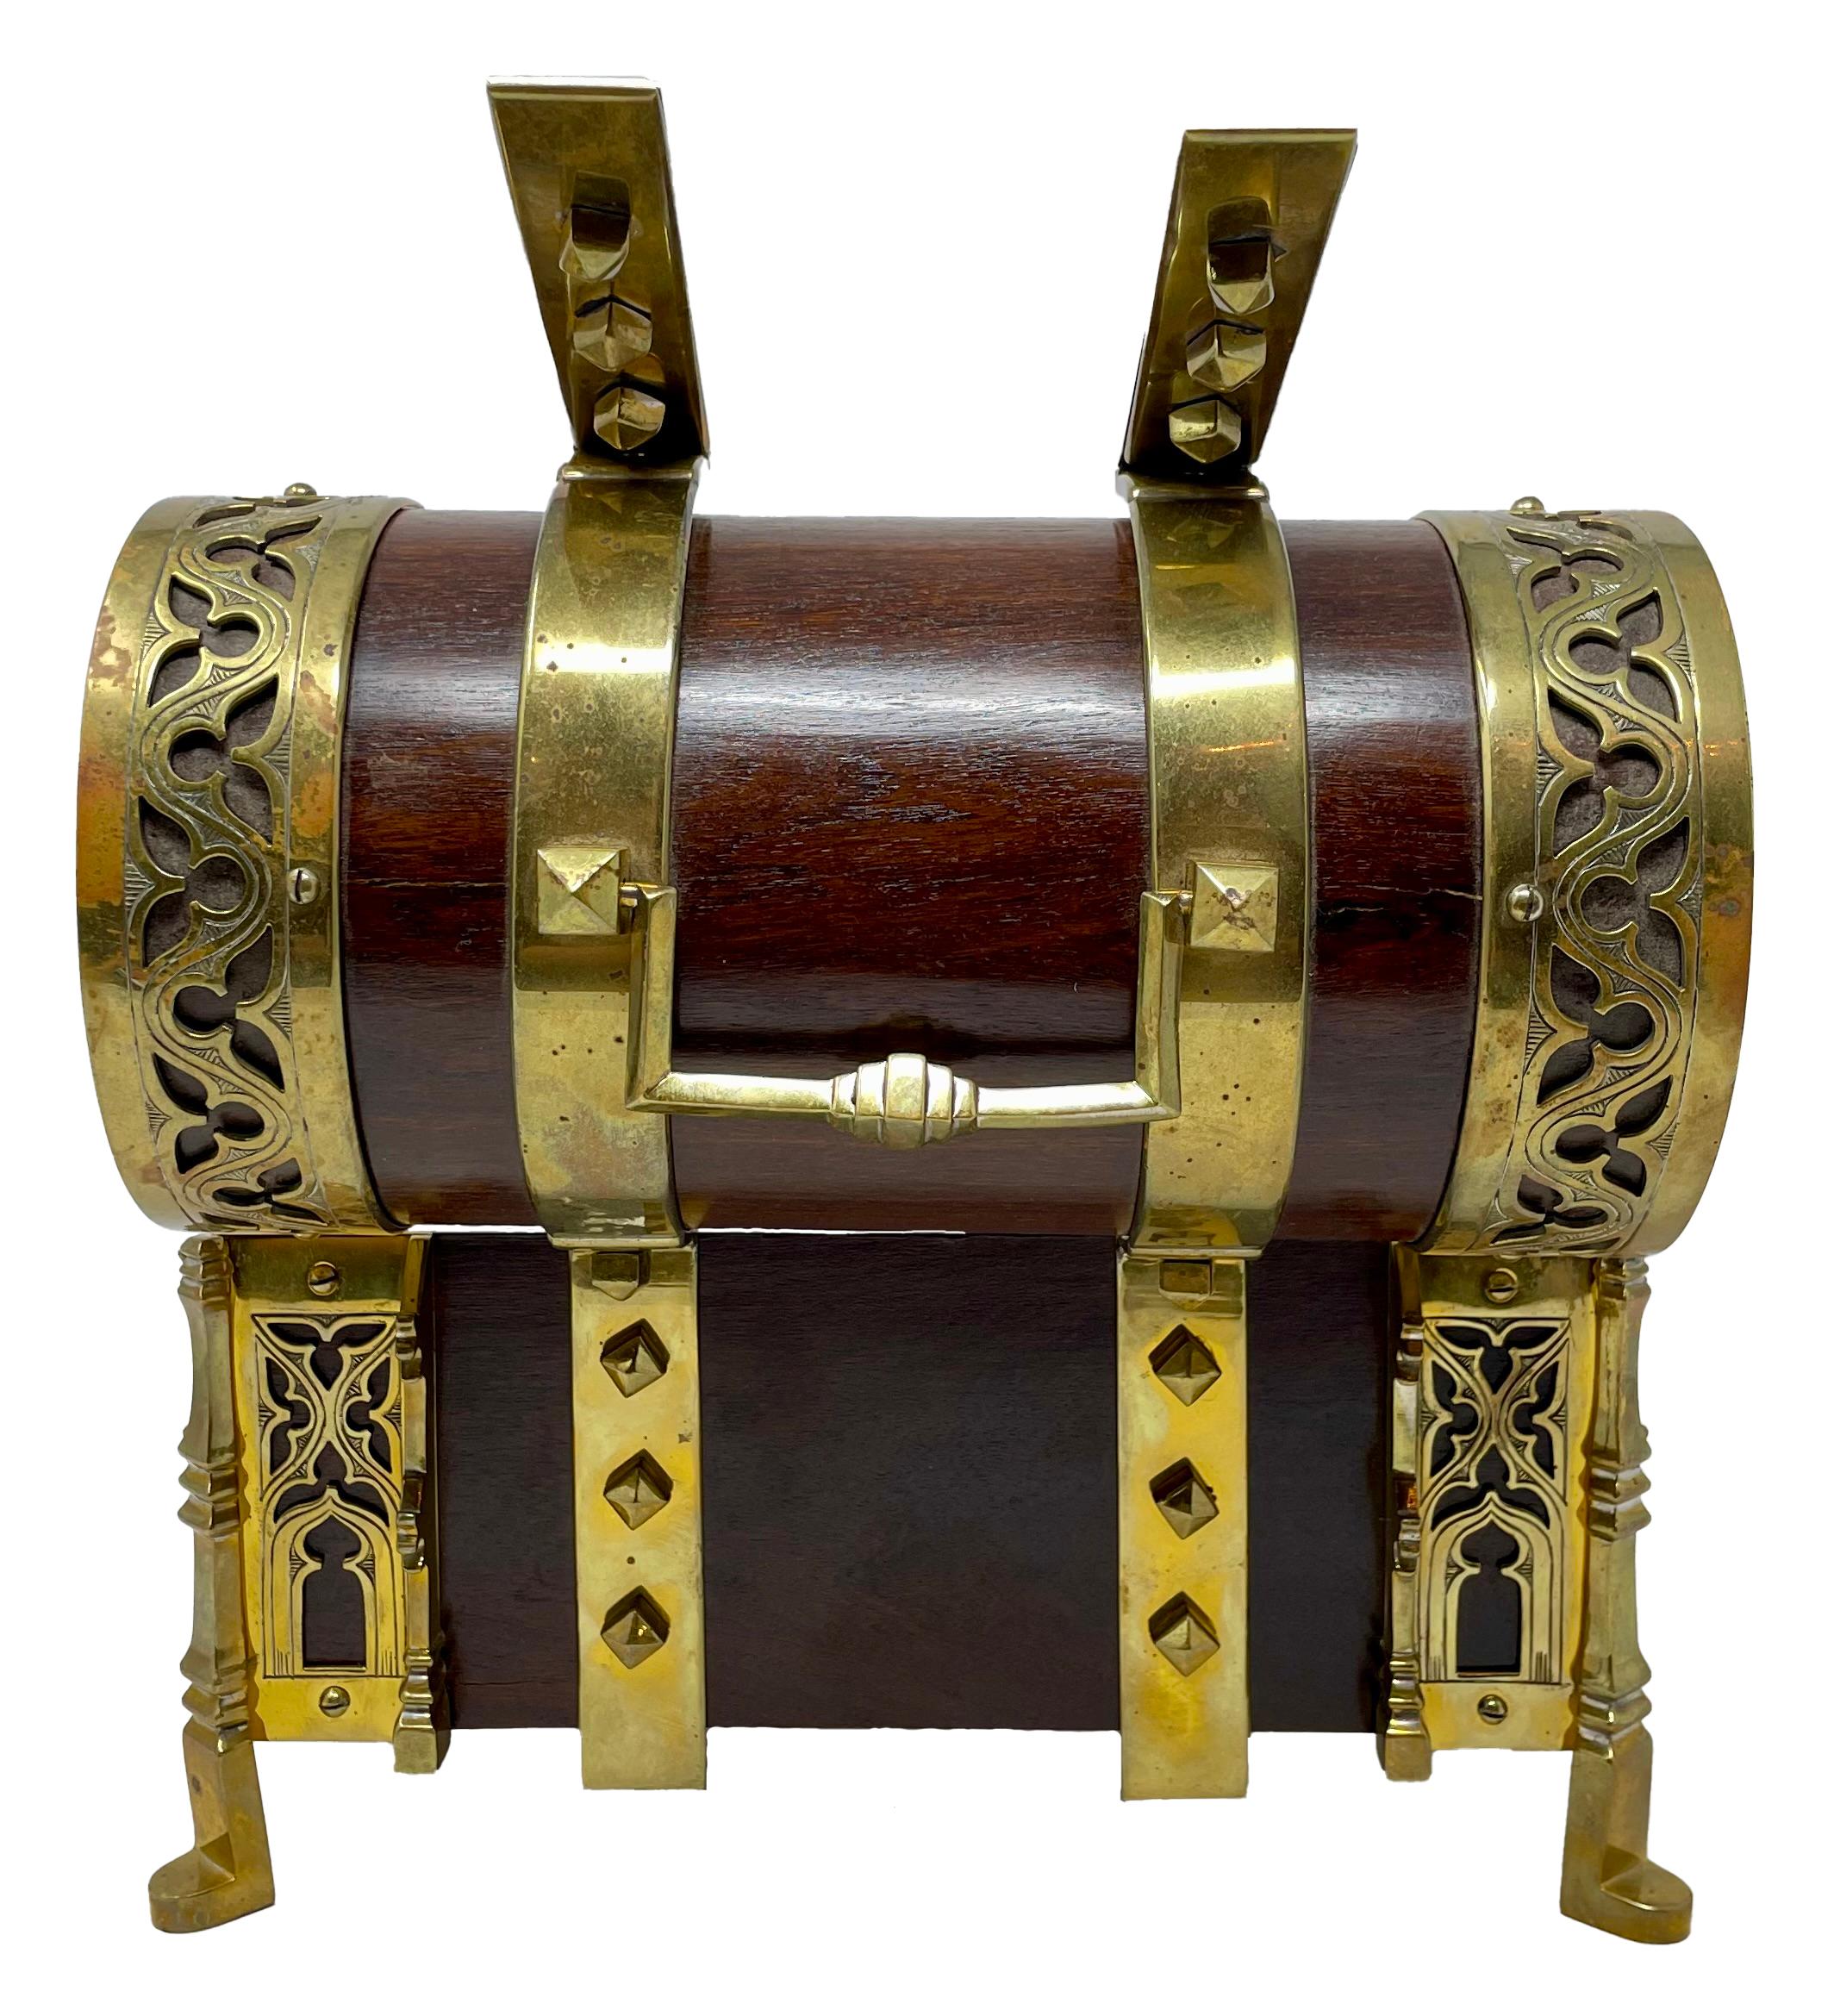 Antique English Mahogany with Brass Mounts Footed Jewel Box, Circa 1860. For Sale 5